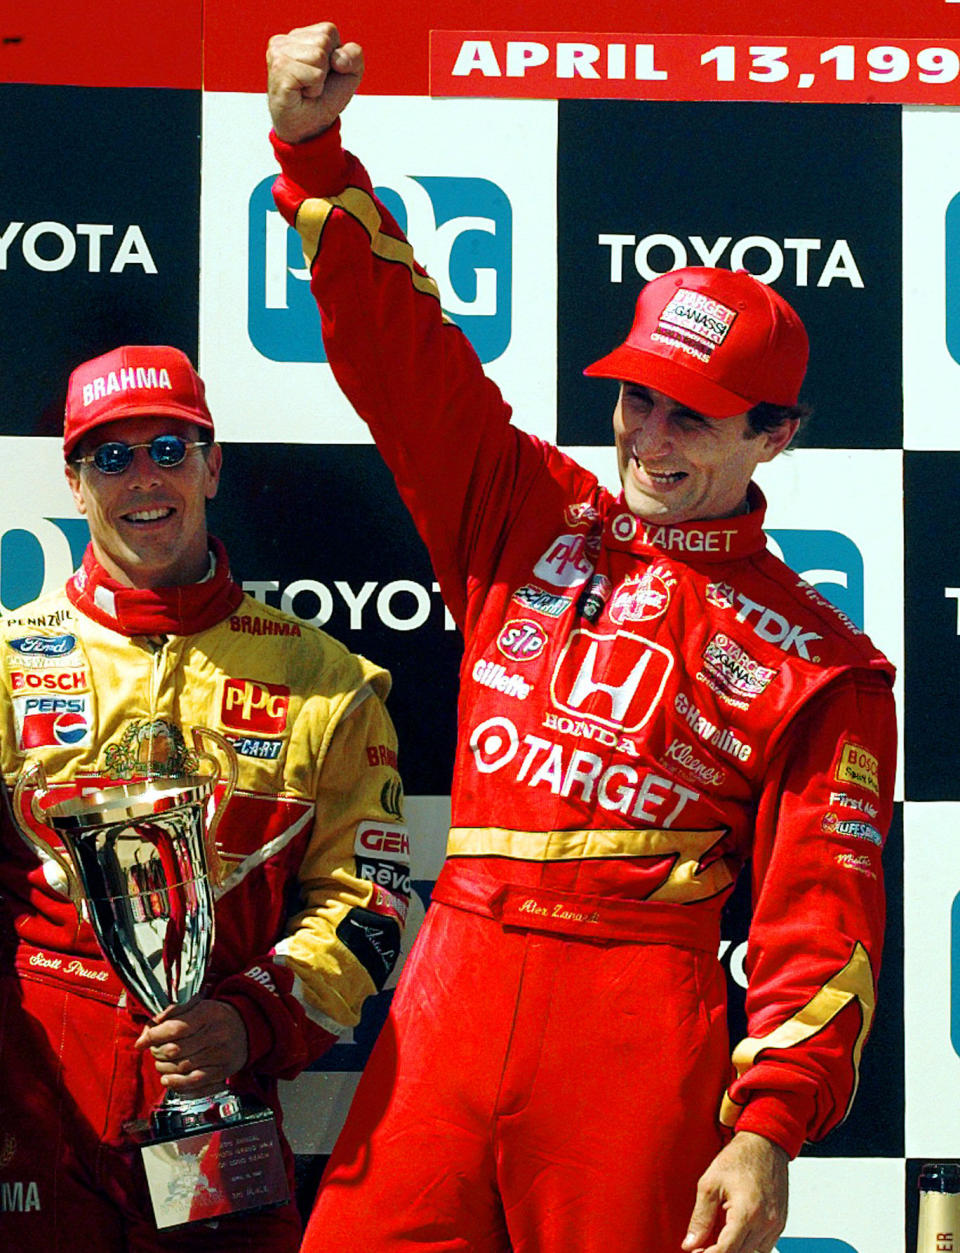 FILE - In this April 13, 1997, file photo, Italian driver Alex Zanardi raises his fist while he celebrates his victory at the Toyota Grand Prix of Long Beach in Long Beach, Calif. Third place finisher Scott Pruett, of Crystal Bay, Nev., is at left holding his trophy. Every now and then Alex Zanardi has a chance encounter with someone who reminds him there’s never any reason to feel sorry for himself, not that he ever had during his two vastly different lifetimes: the one with legs, and the other as a double-amputee. (AP Photo/Kevork Djansezian, File)